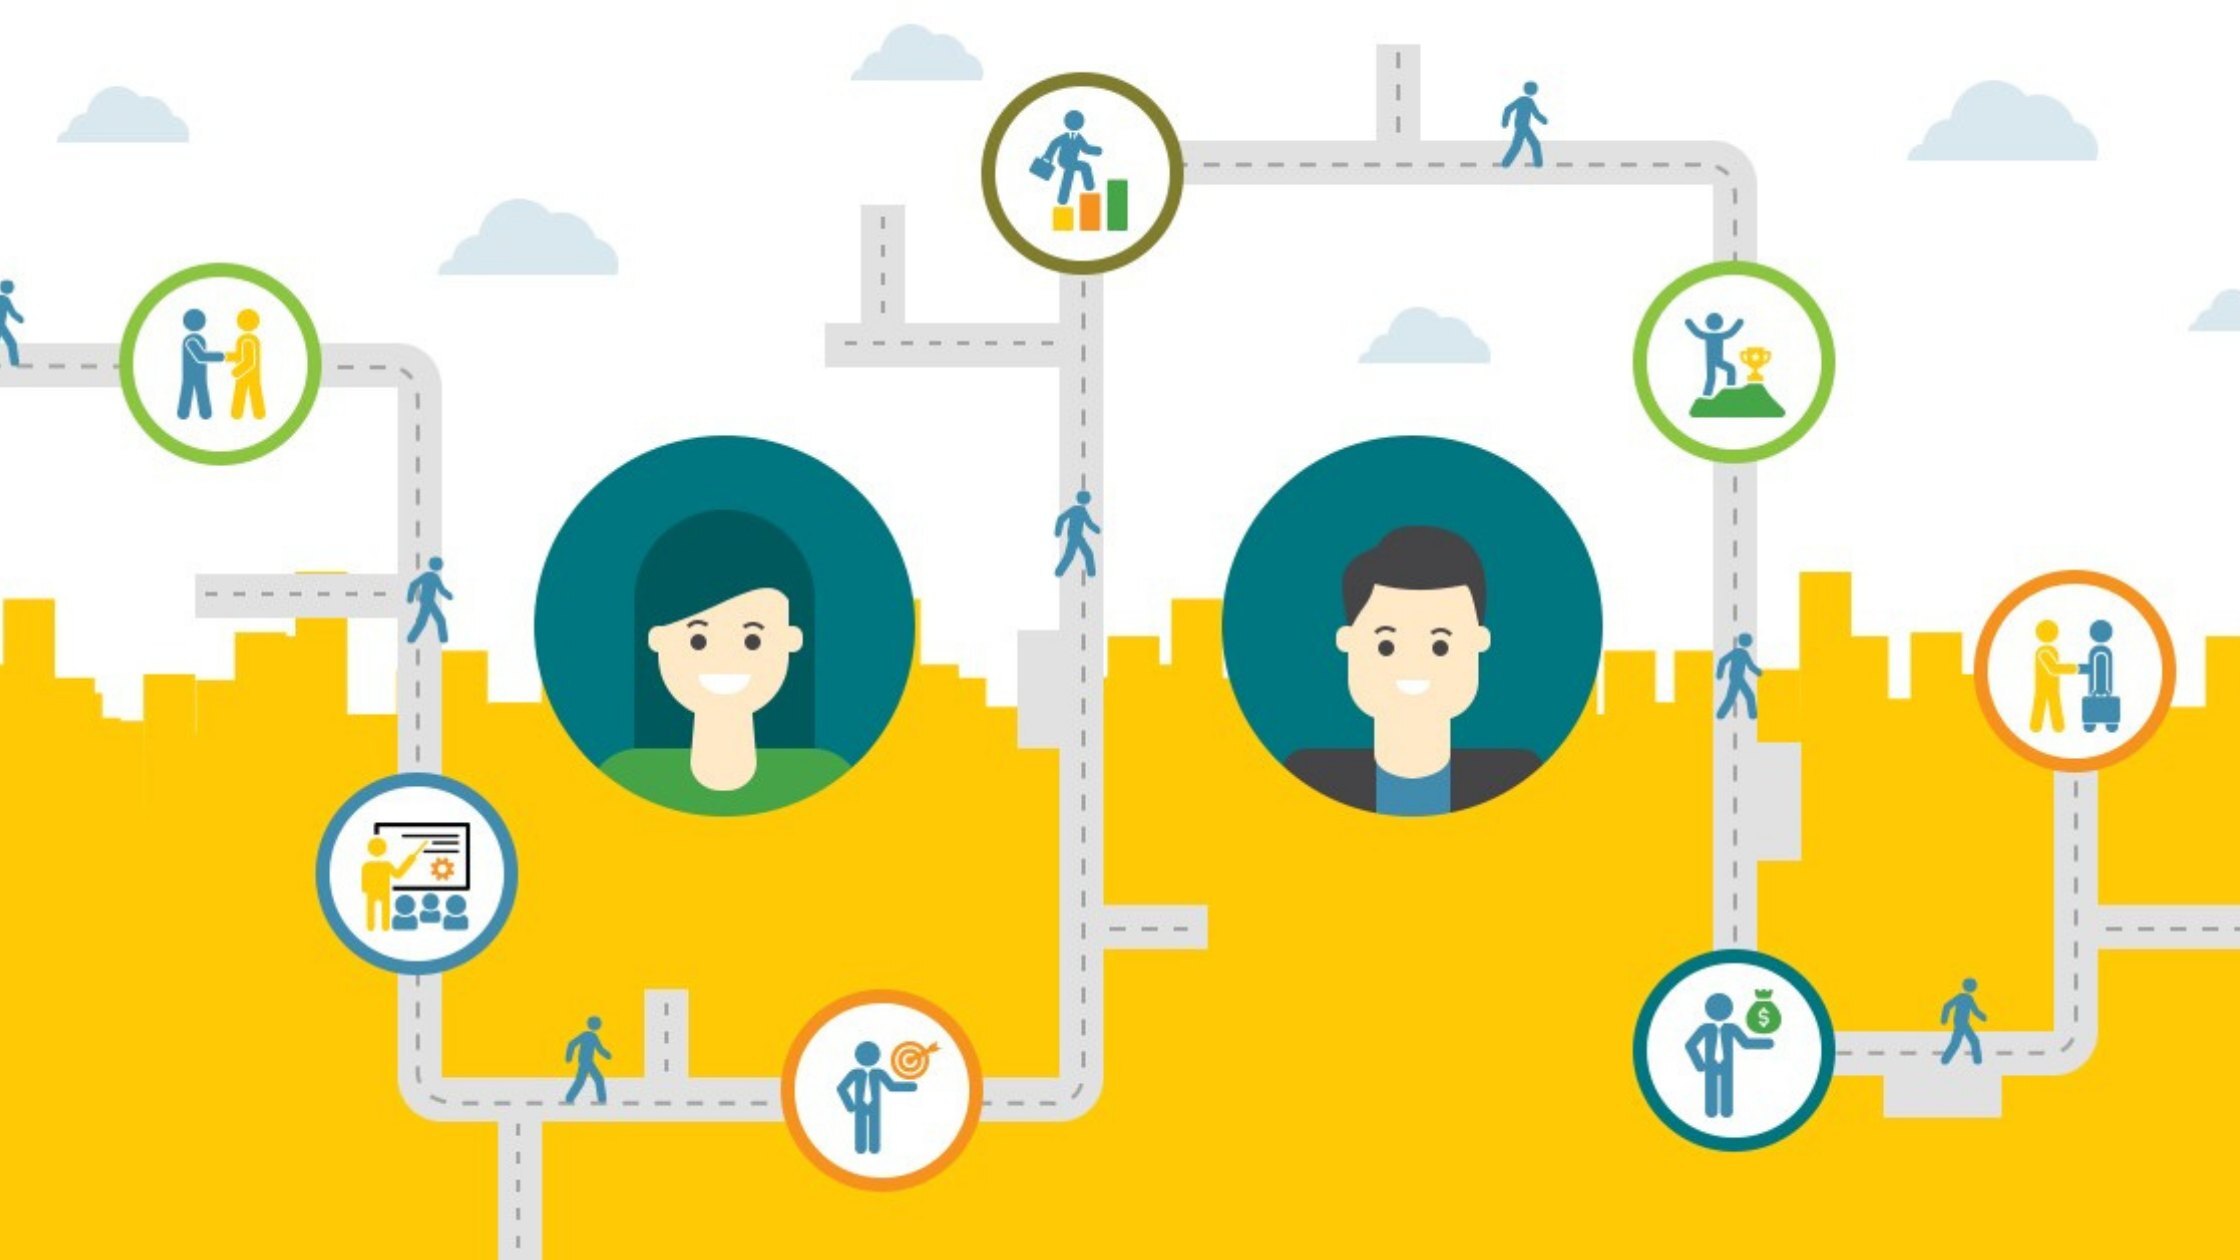 Map An Employee Experience Journey Like a Pro - 5 Practical Expert Tips